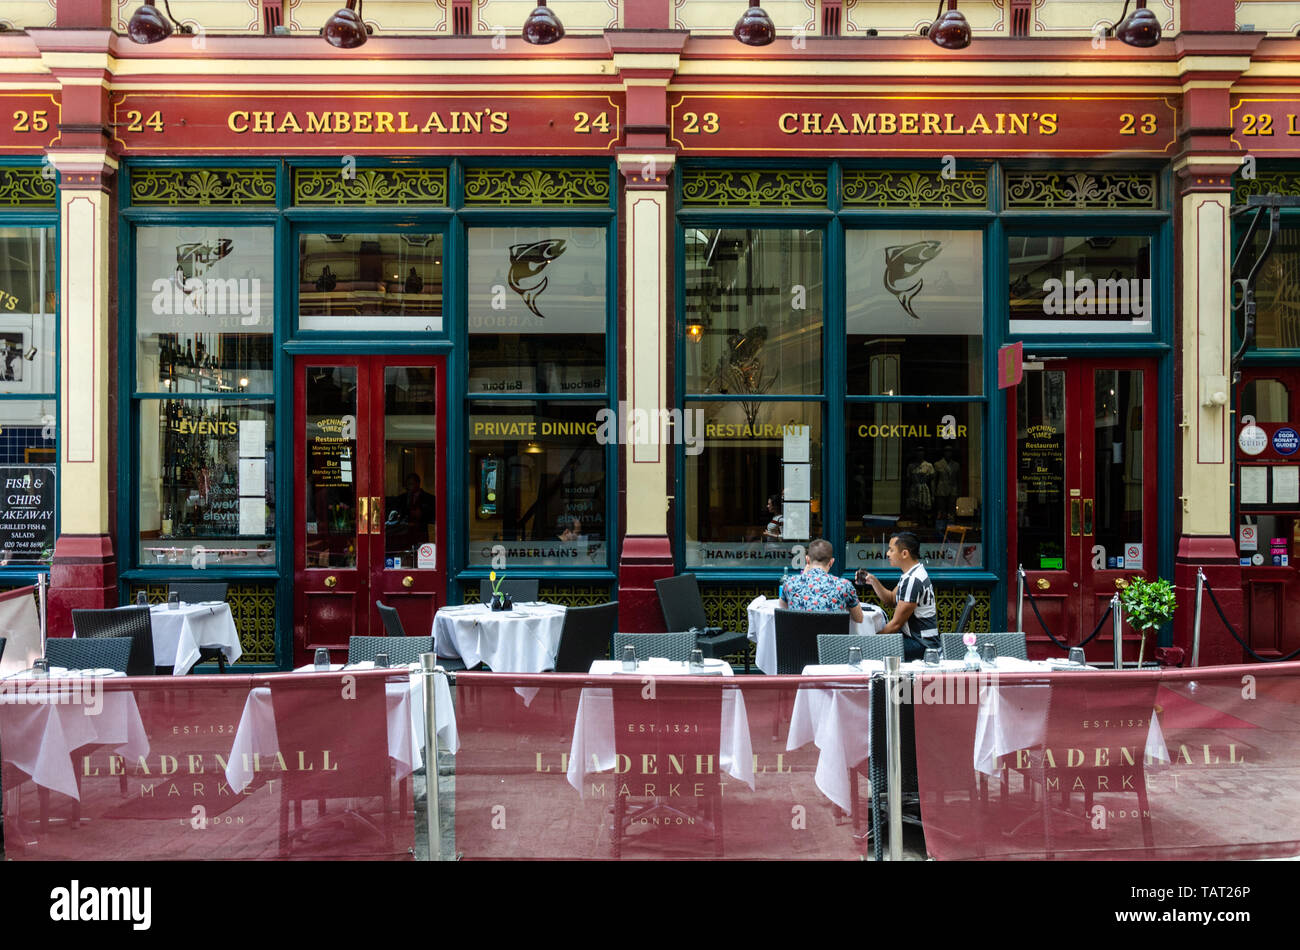 A couple sit and eat at a table outside Chamerlain's restaurant in Leandenhall Market in the financial disrict of The City of London, UK Stock Photo